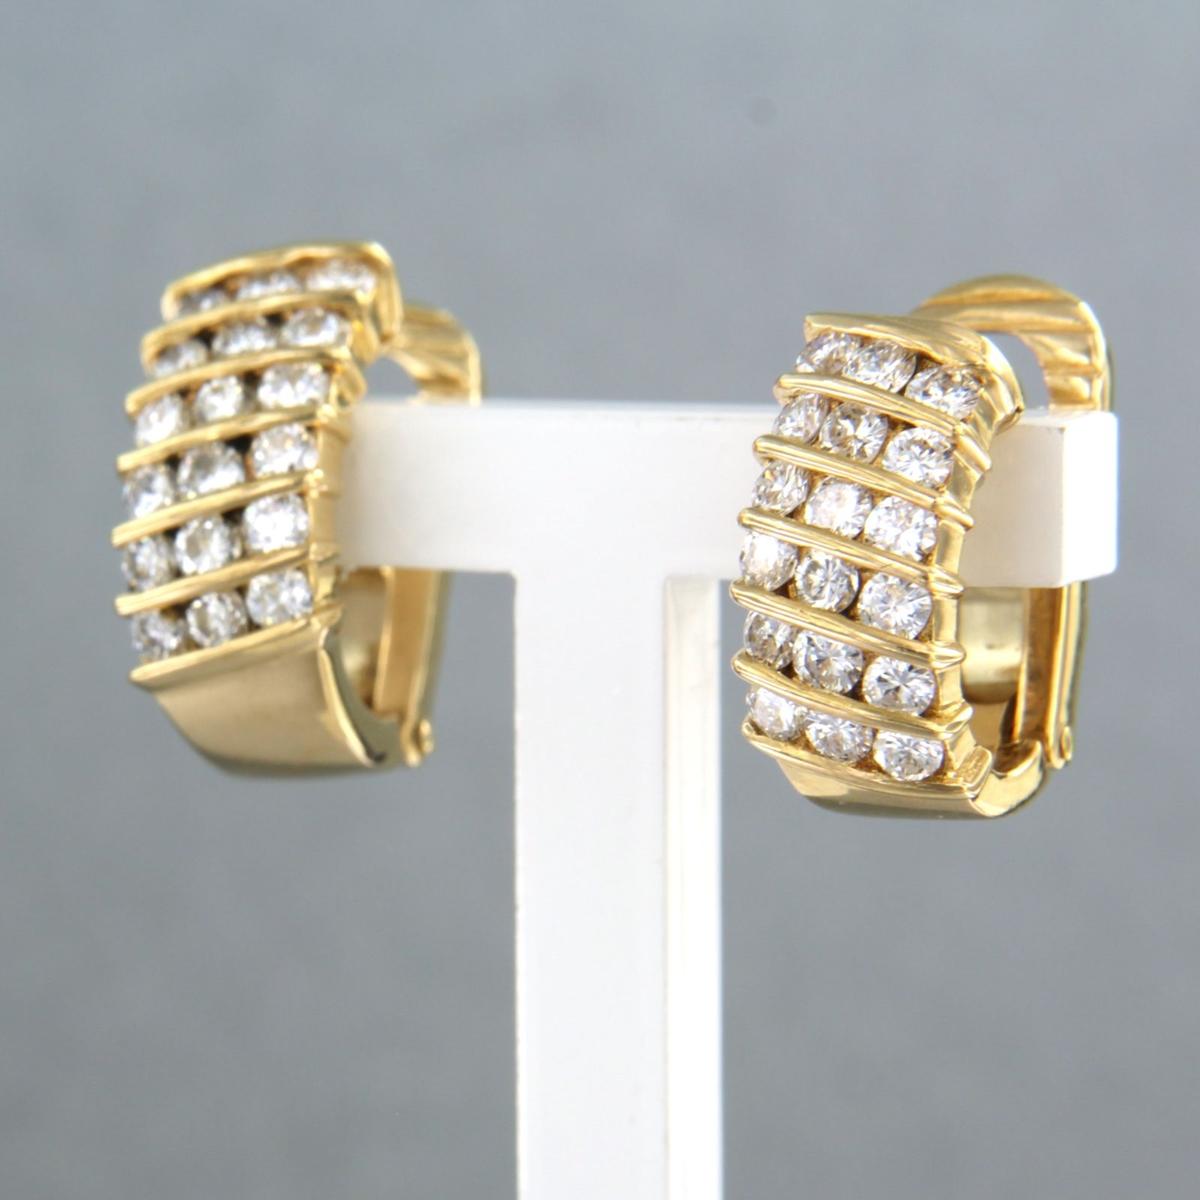 Brilliant Cut Earrings set with diamonds up to 1.00ct 18k yellow gold For Sale